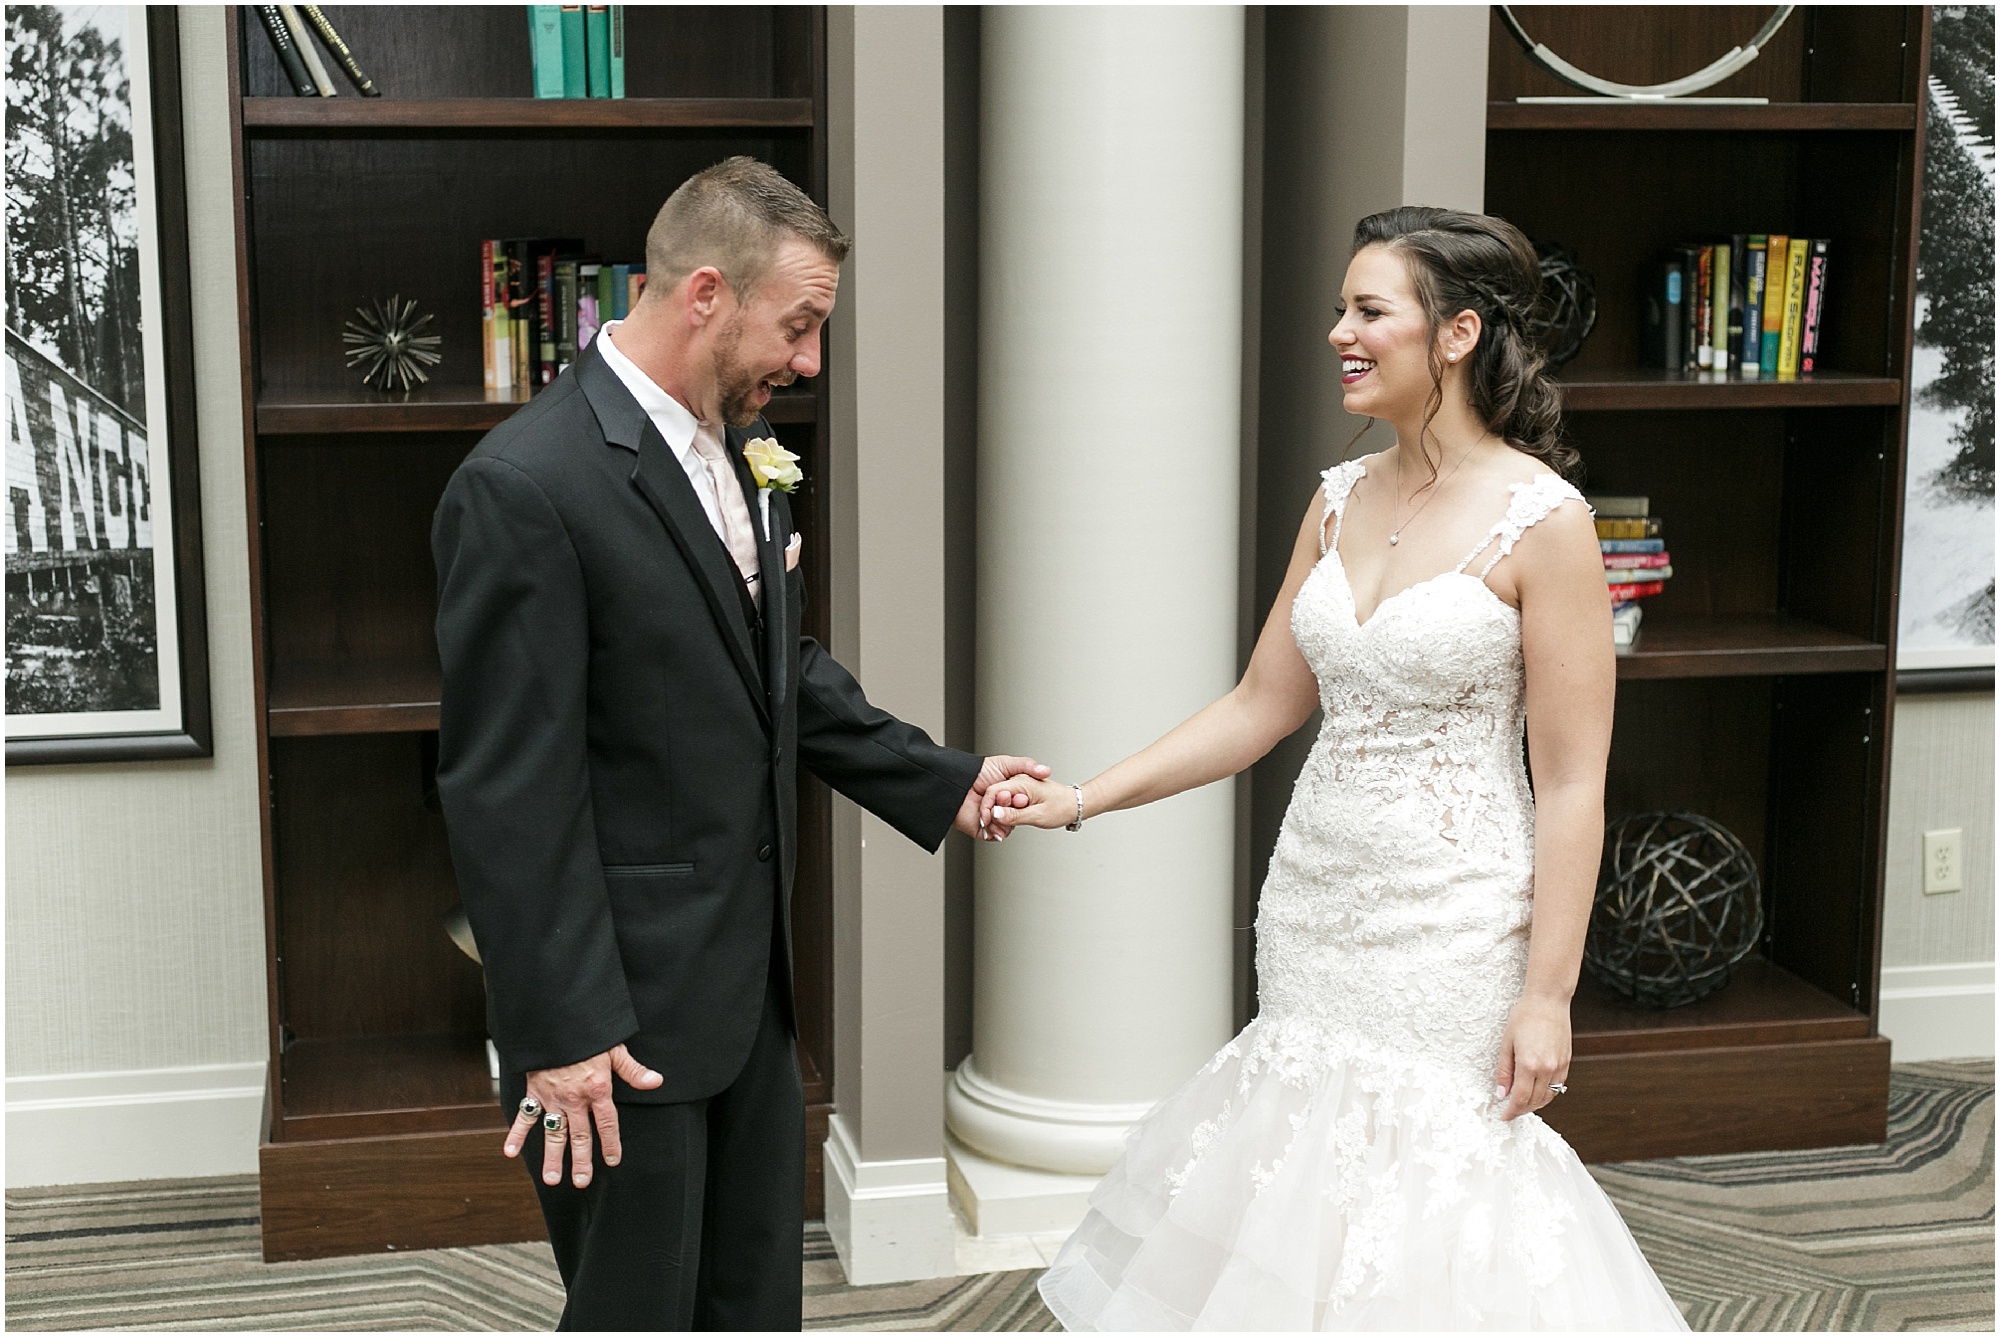 Groom's surprised reaction to seeing his bride for the first time on their wedding day. 